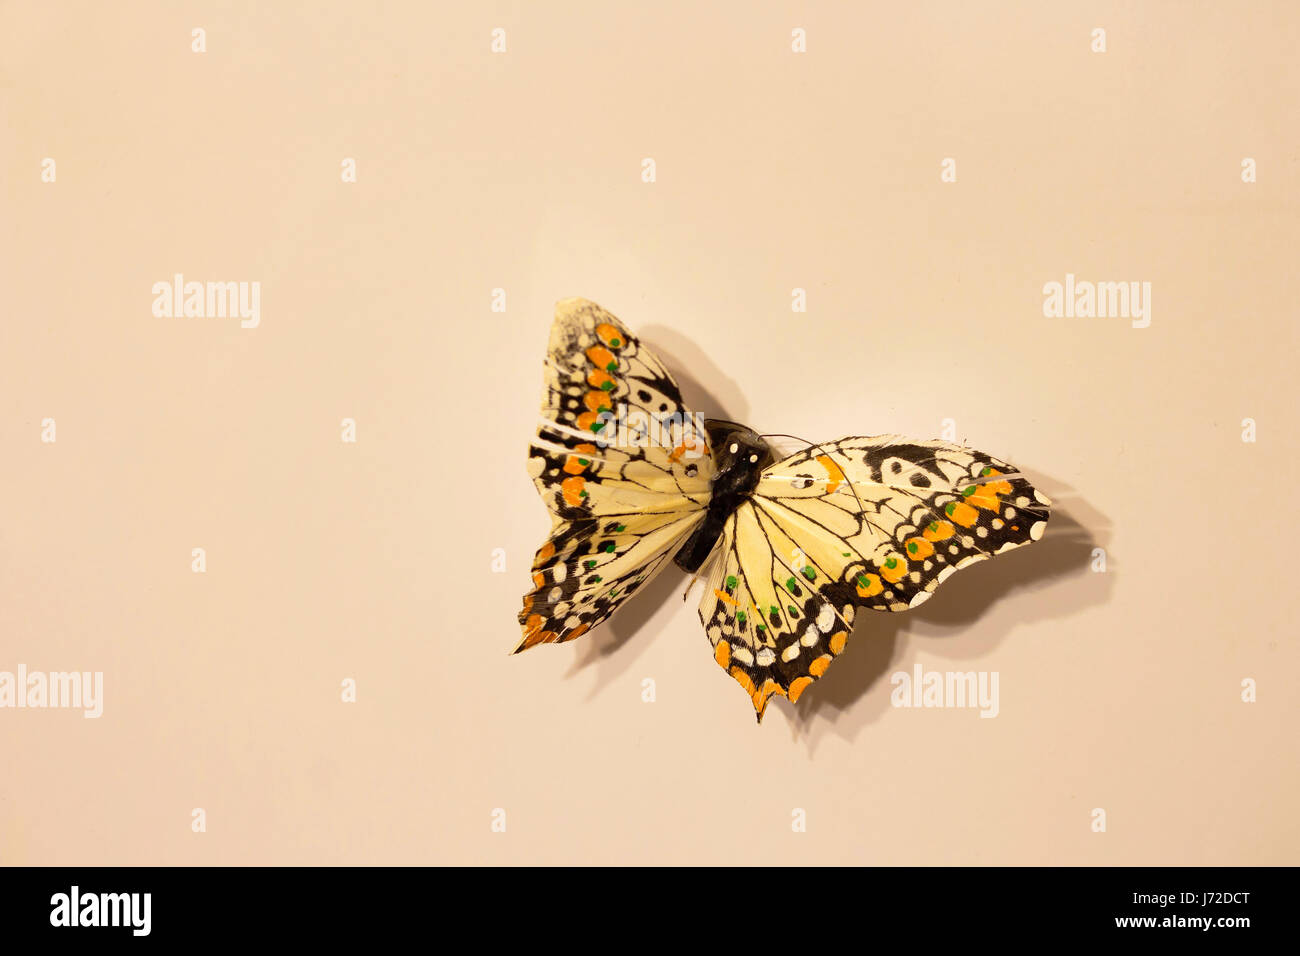 Close up view of isolated magnet (souvenir) shaped of butterfly on beige background. Stock Photo